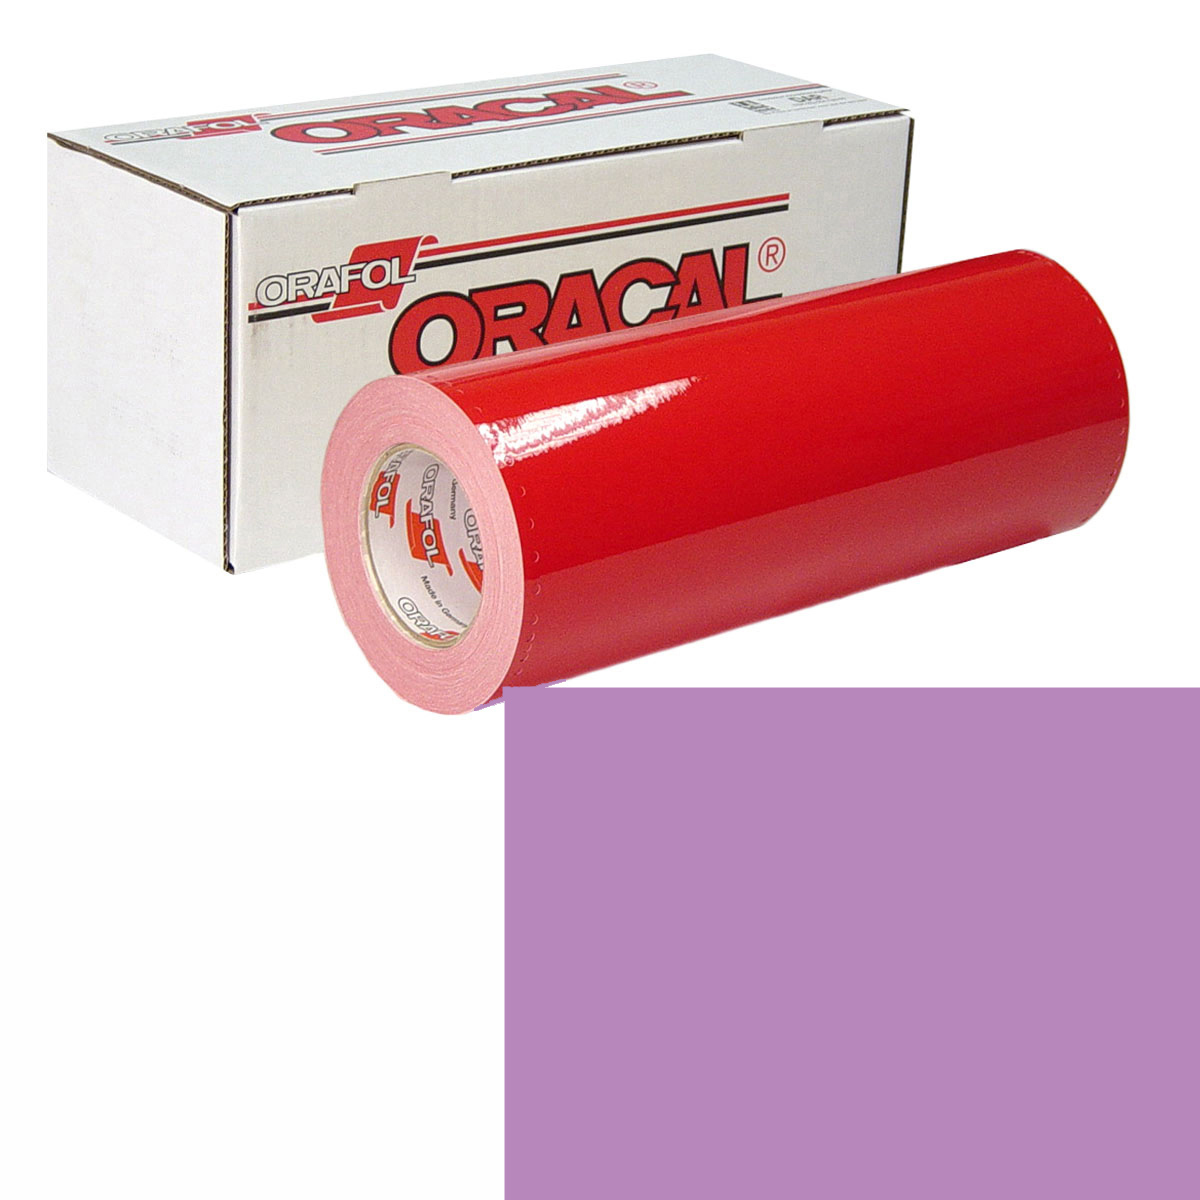 ORACAL 951 15in X 10yd 409 Pale Lilac